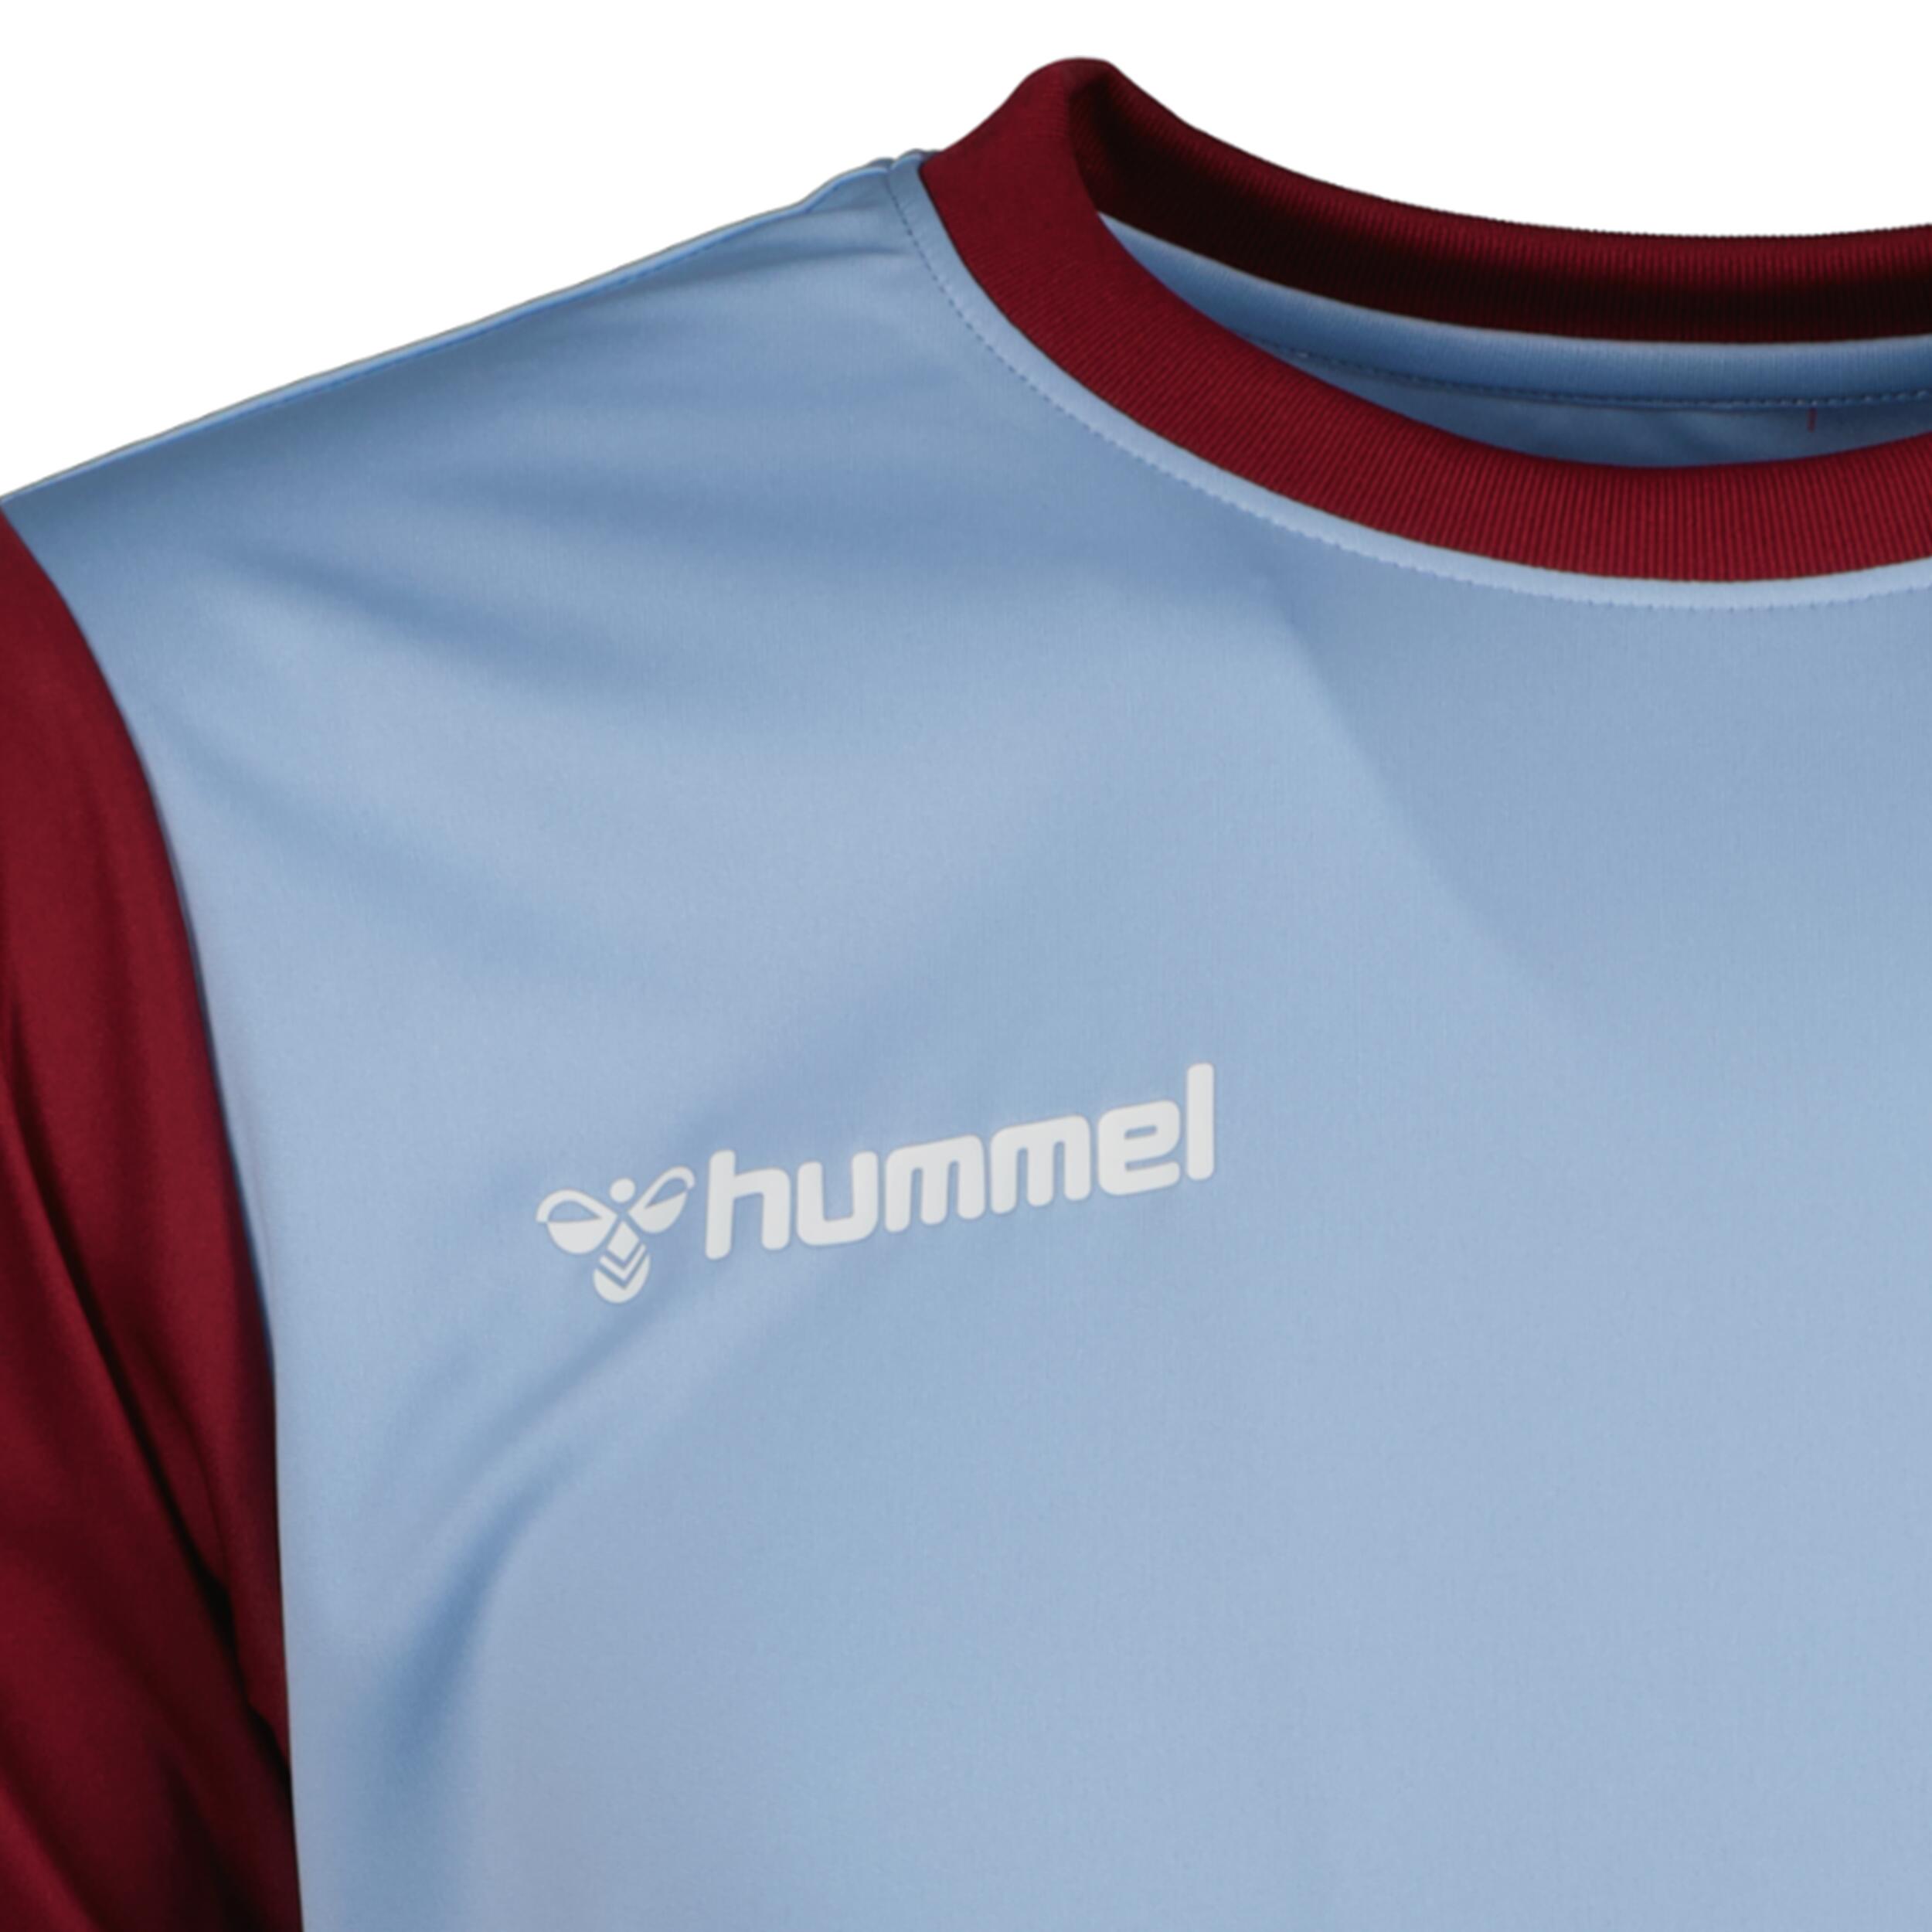 Match jersey for men, great for football, in argentina blue/maroon 3/3